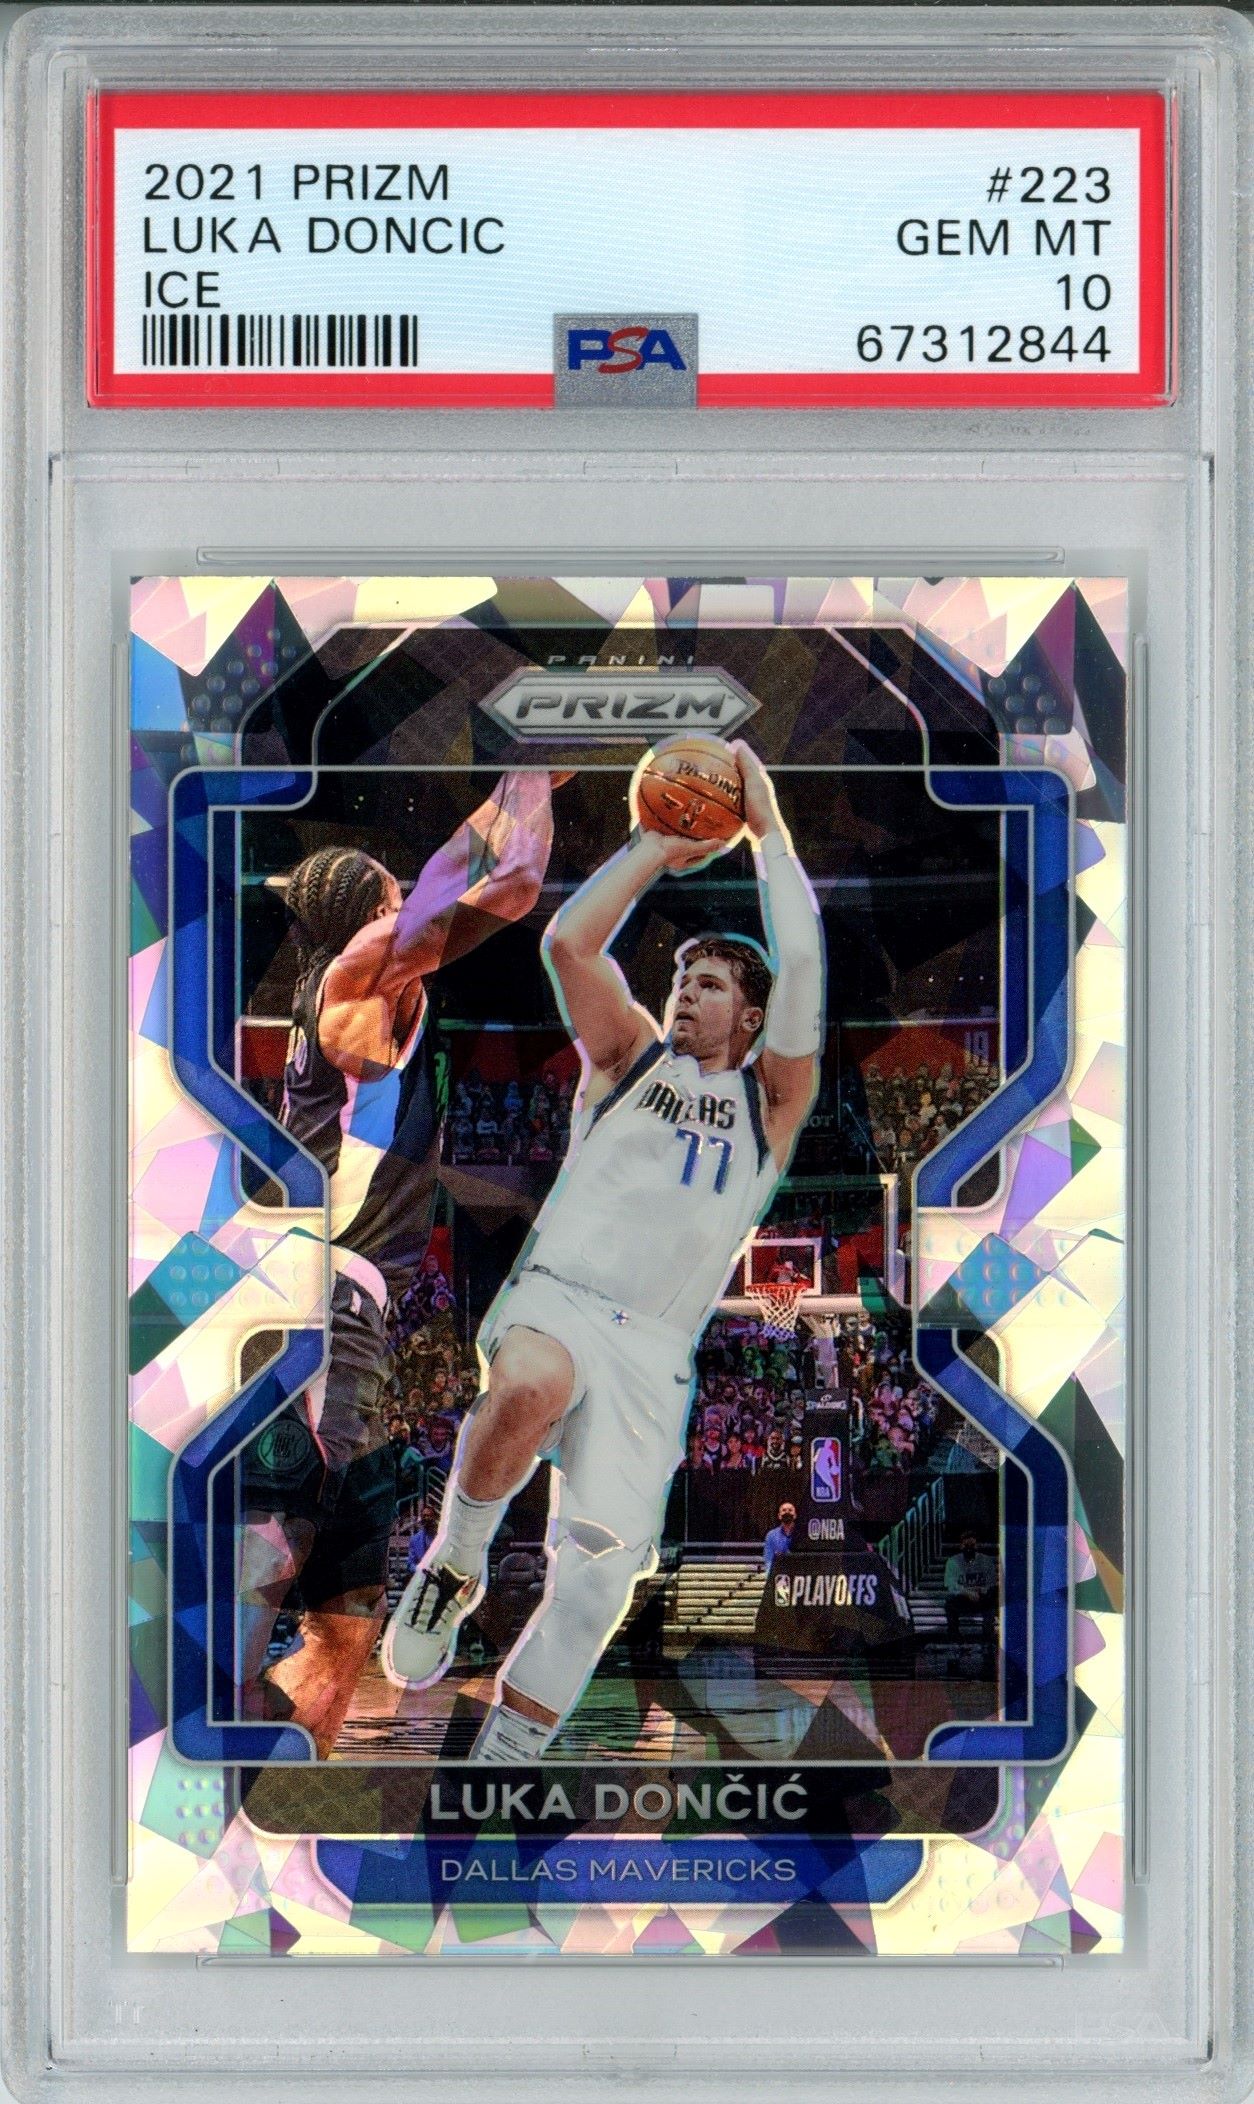 Luka Doncic Gold Prizm Rookie Card Sells for $800K - Boardroom